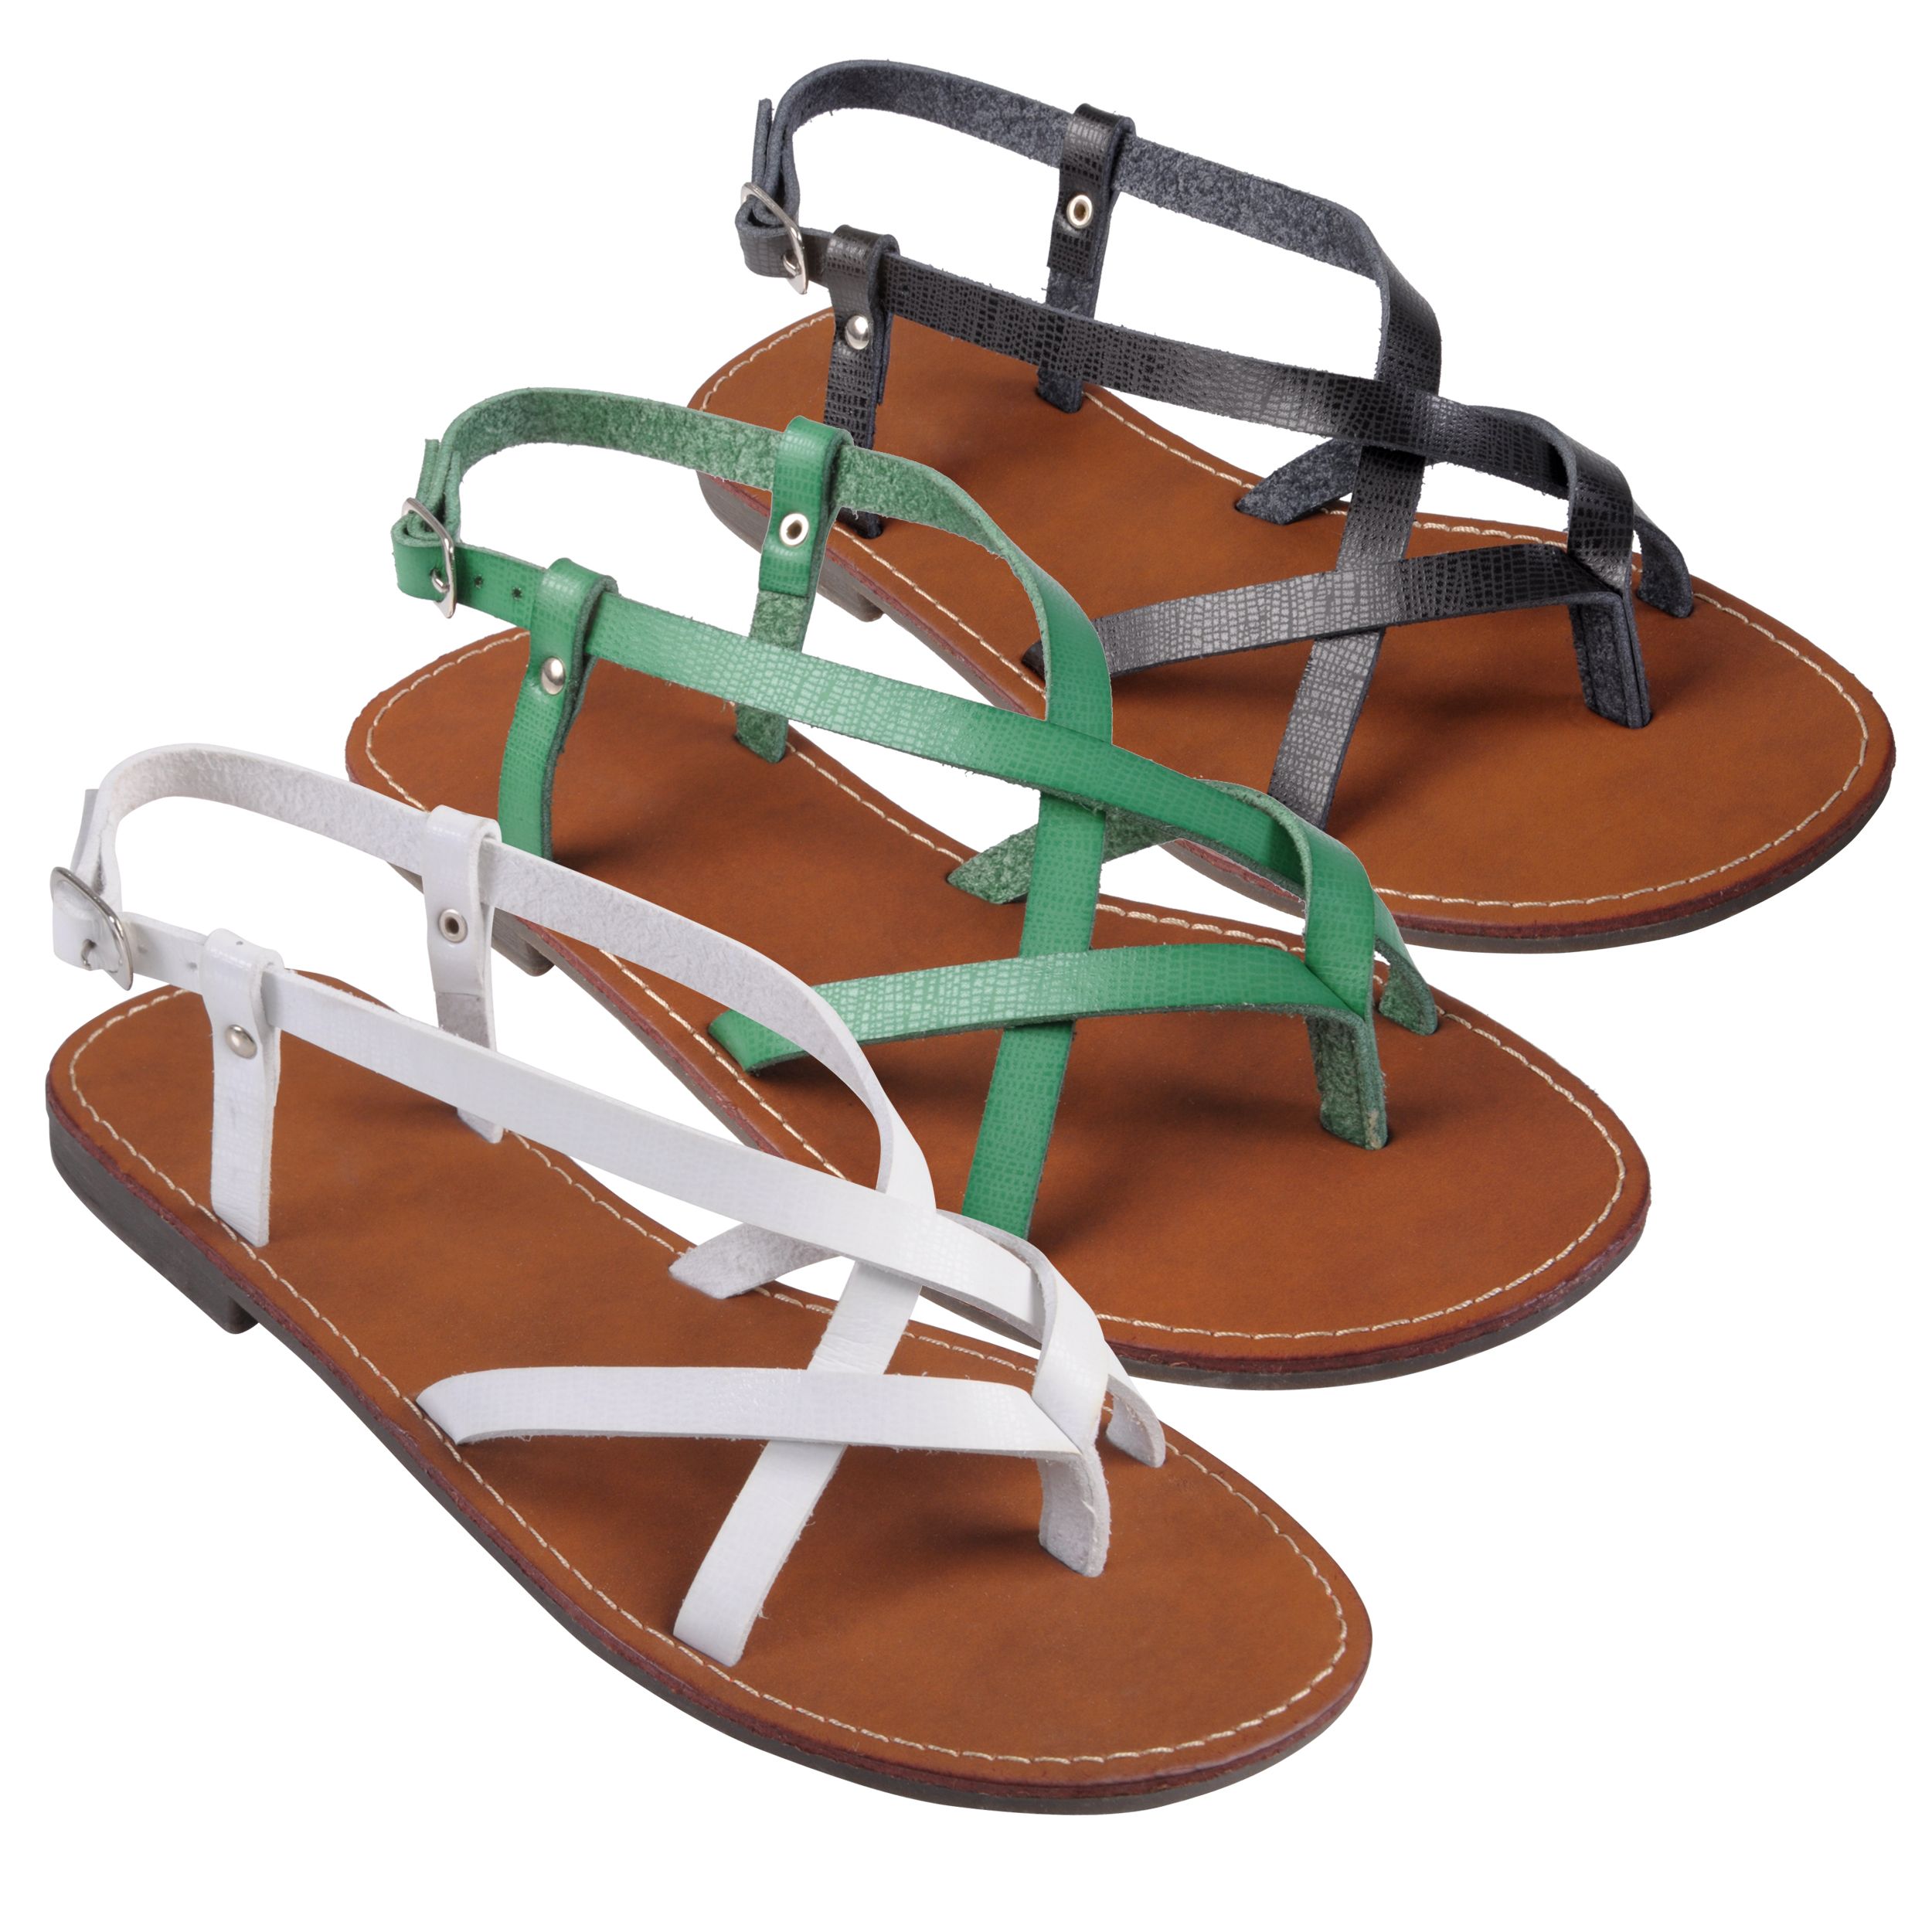 Journee Collection Women's 'Butter 21' Strappy Flat Sandals  